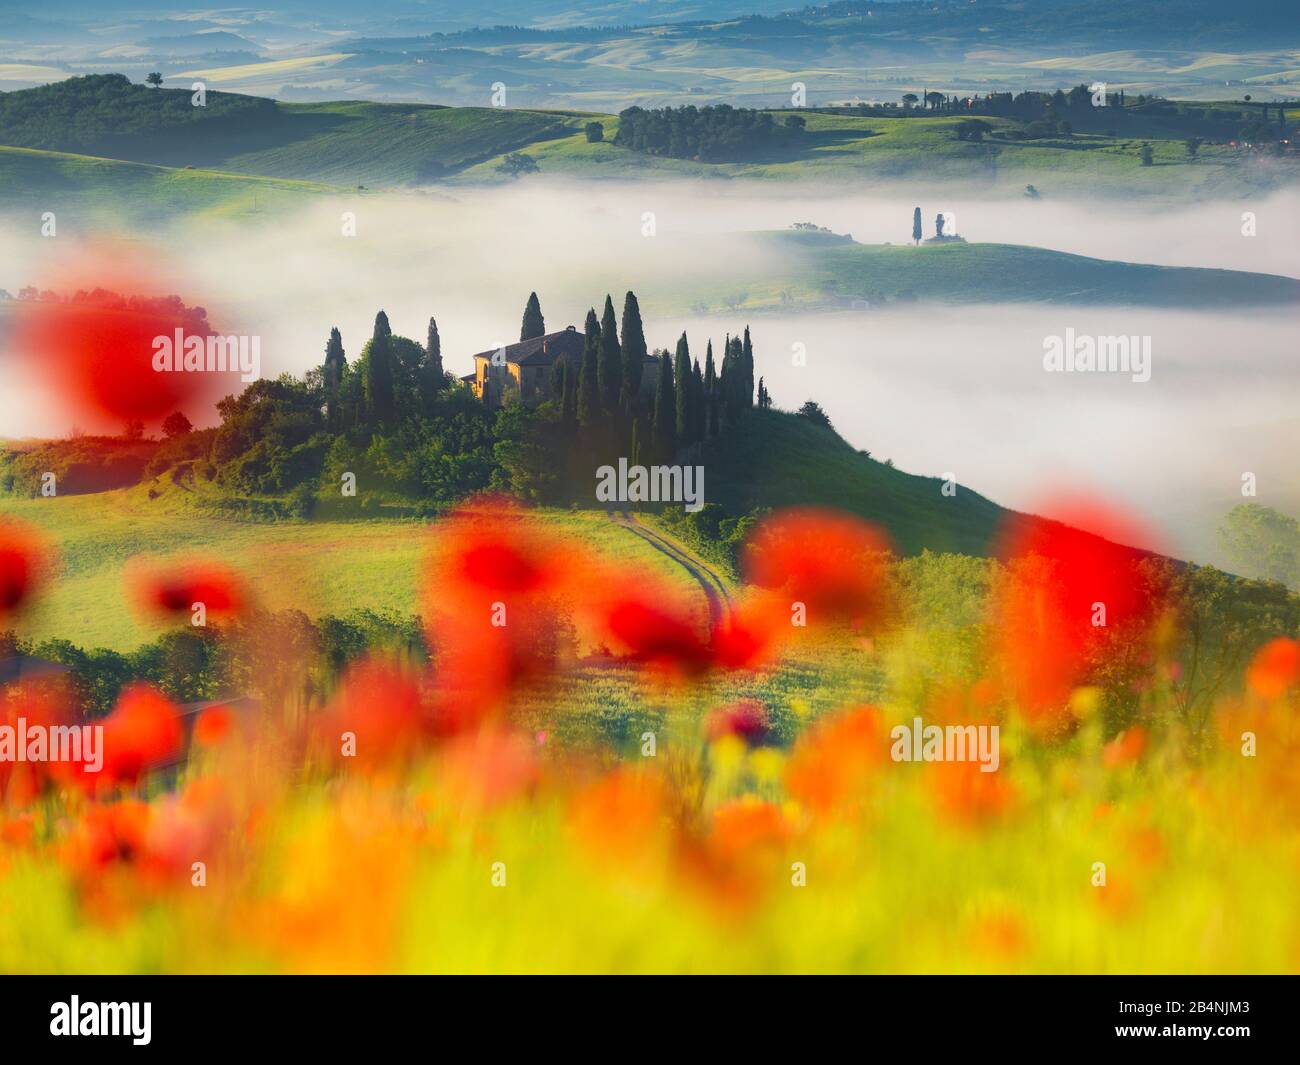 Country house Belvedere near San Quirico d'Orcia, Val d'Orcia, Tuscany, Italy, poppies in the foreground, in the background the country house Stock Photo